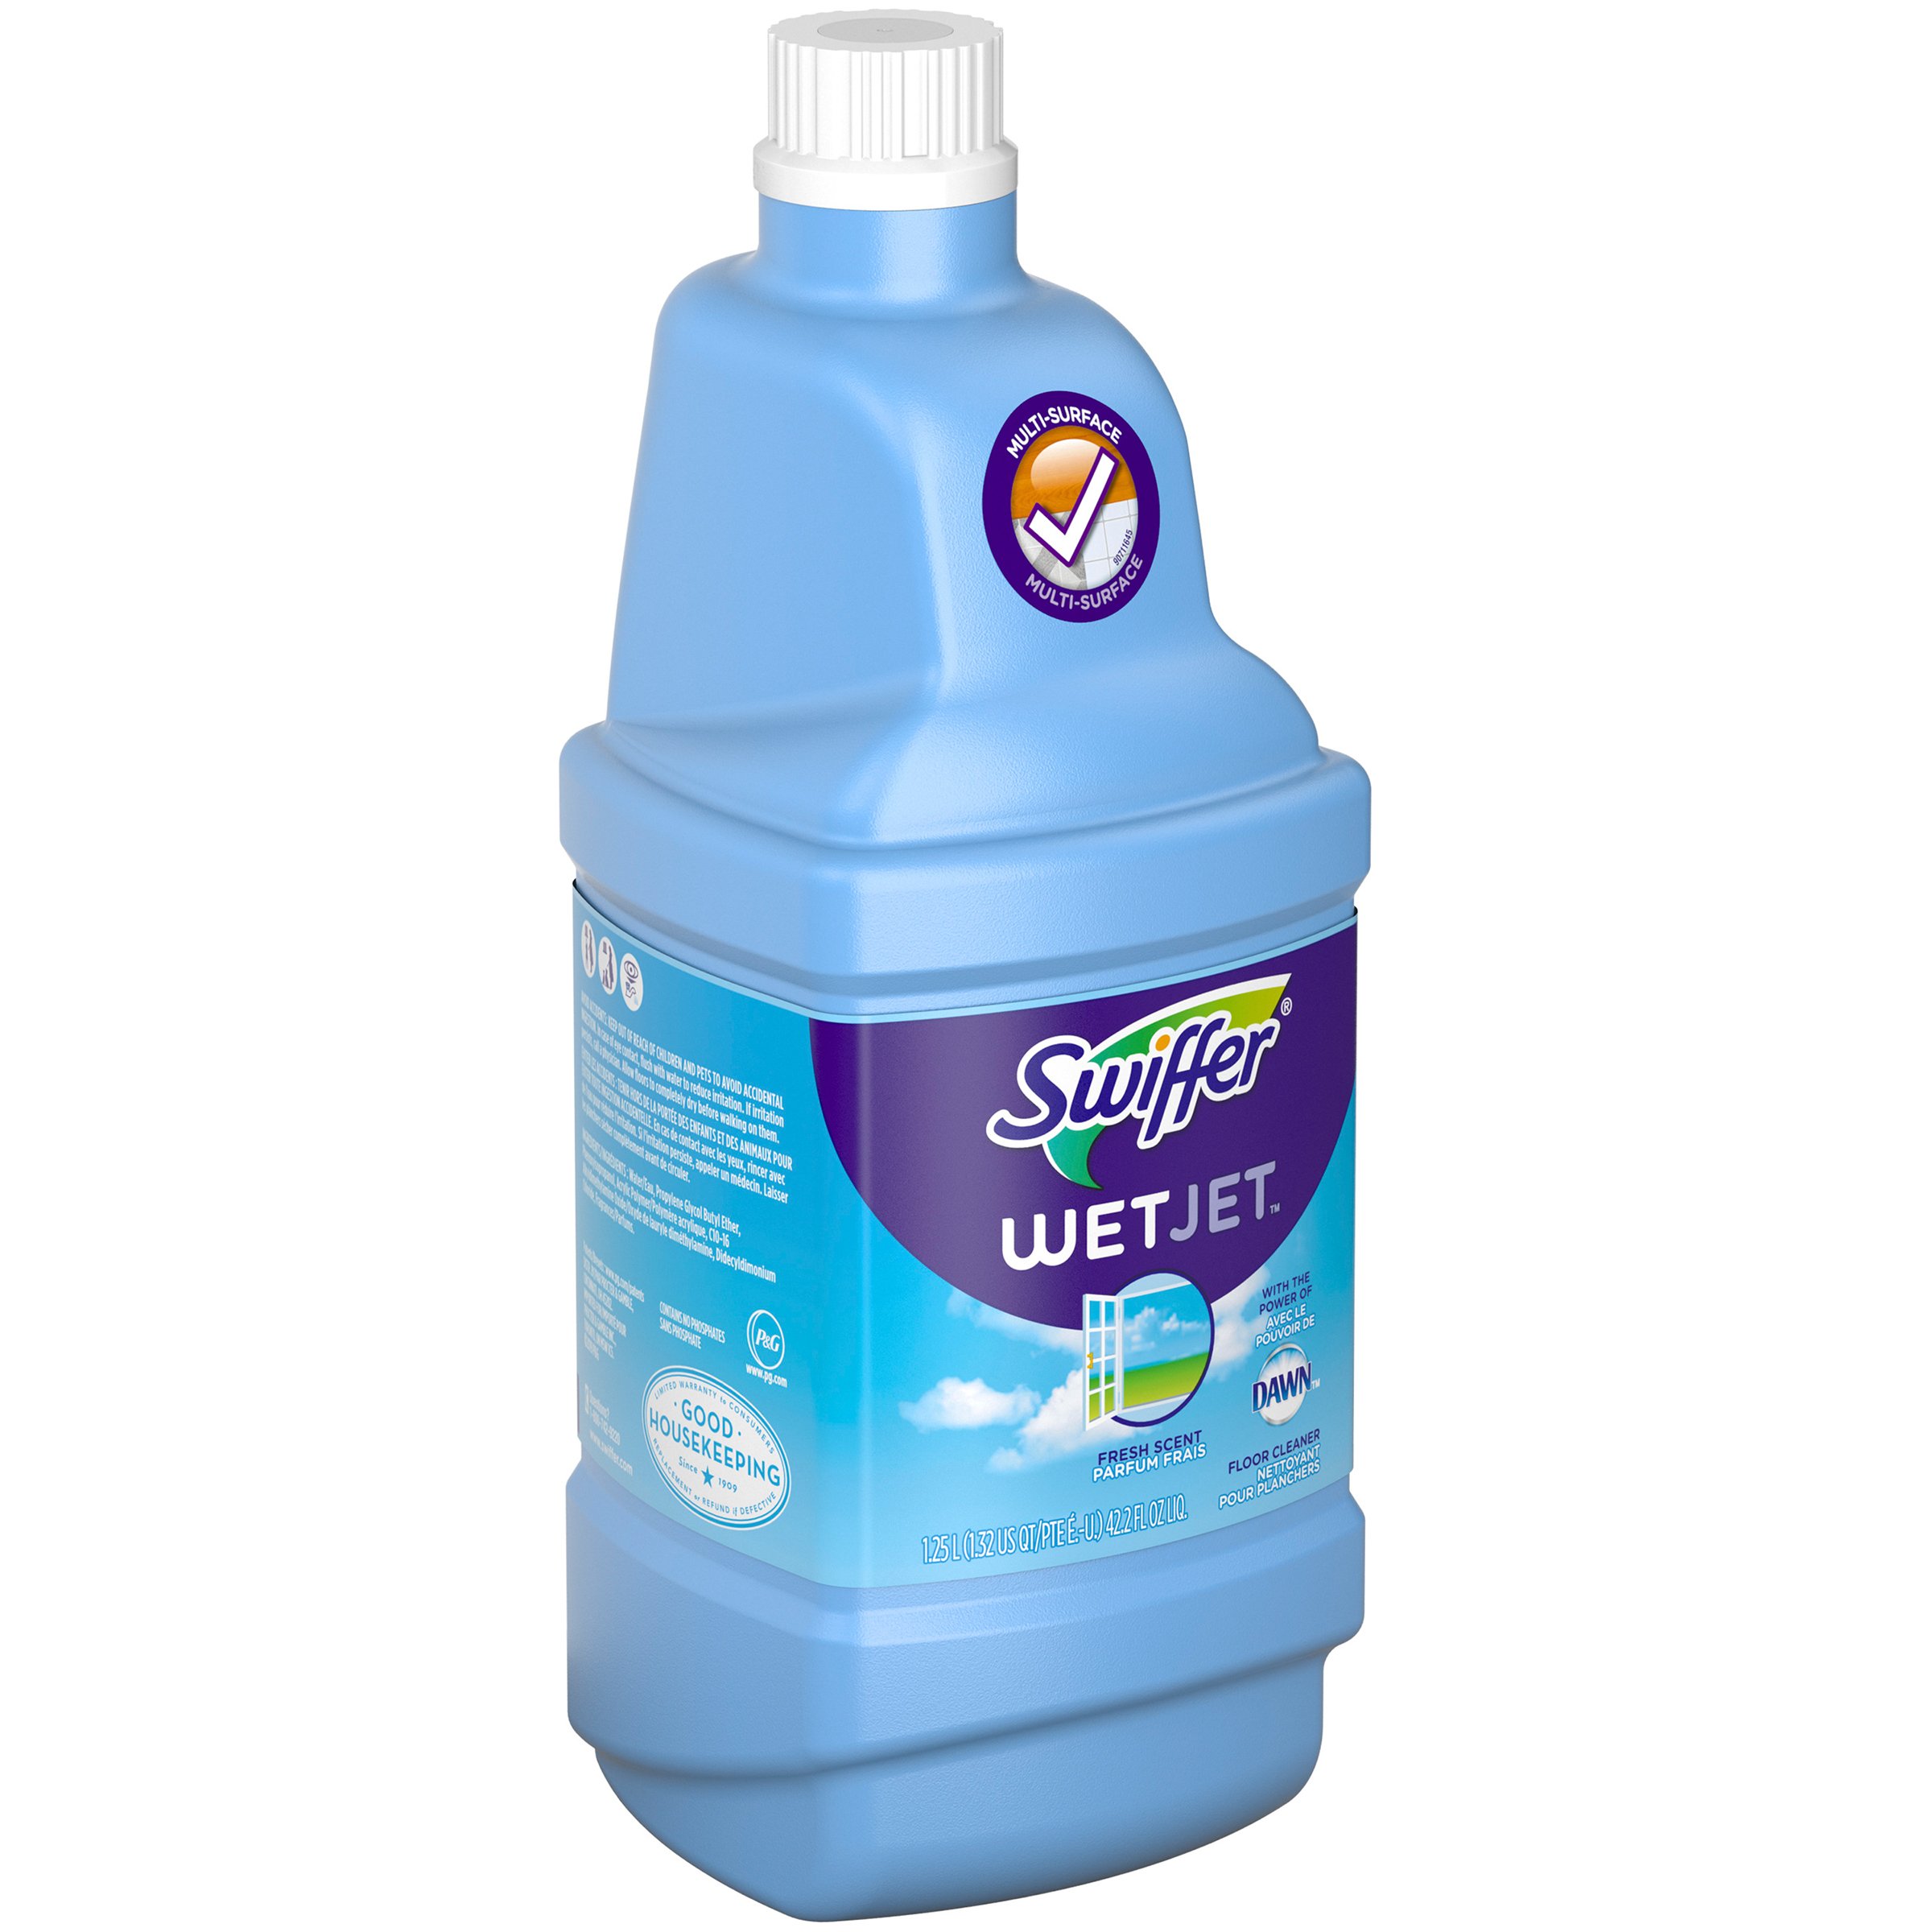 WetJet with Dawn Scent Multi-Purpose Floor Cleaner Solution Refill - Shop Mops H-E-B